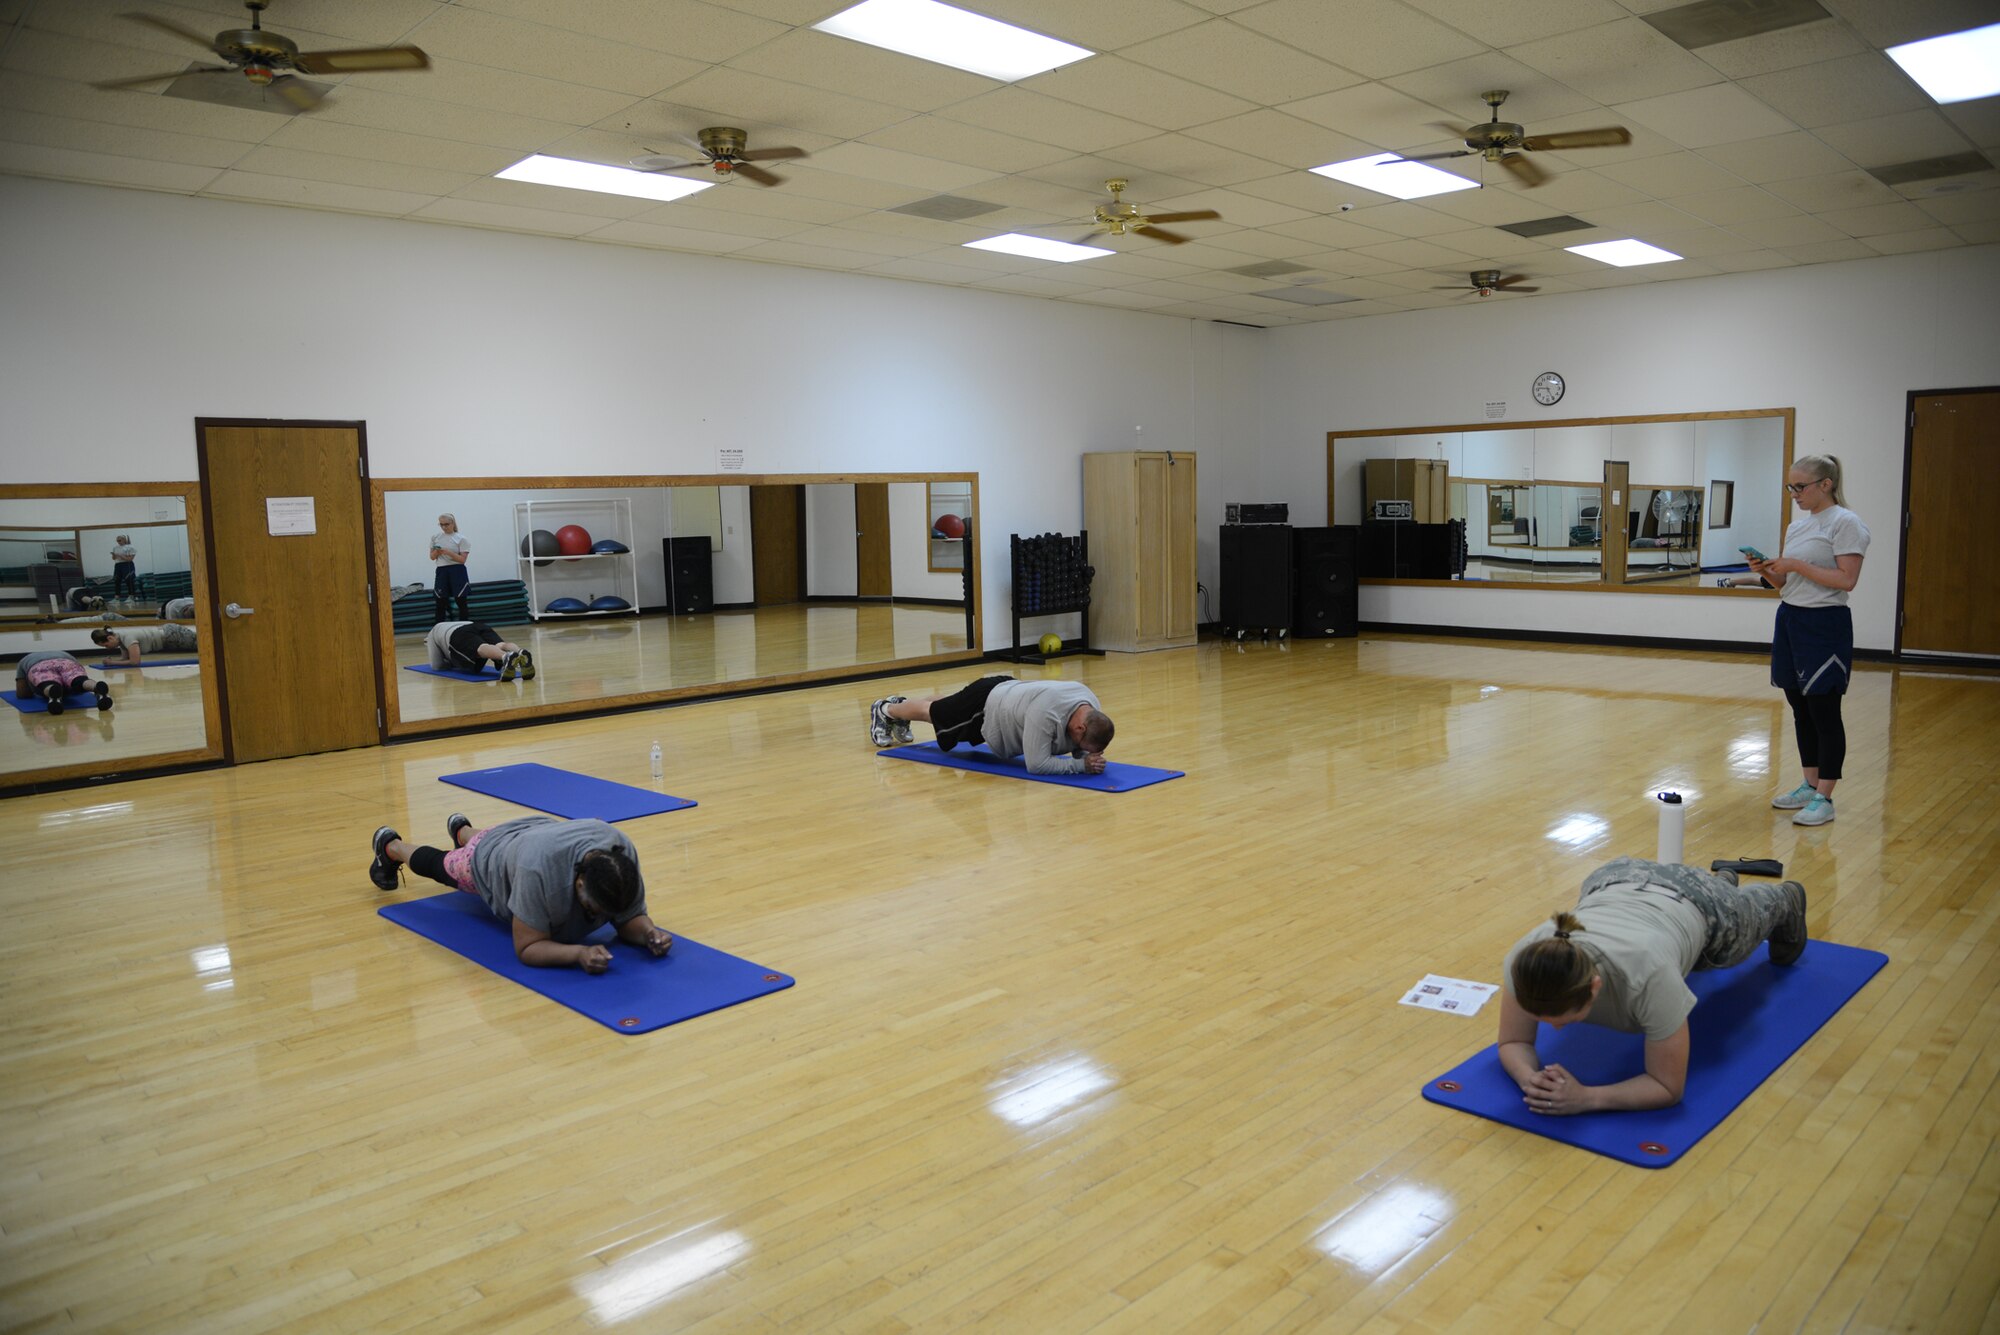 Staff Sgt. Adriana Bitker, 341st Medical Operations Support Squadron physical therapy technician, demonstrates a plank during a core stability class while Senior Airman Kaitlyn Callahan, 341st MDOSS physical therapy technician, monitors the timed exercise Aug. 2, 2017, at Malmstrom Air Force Base, Mont.